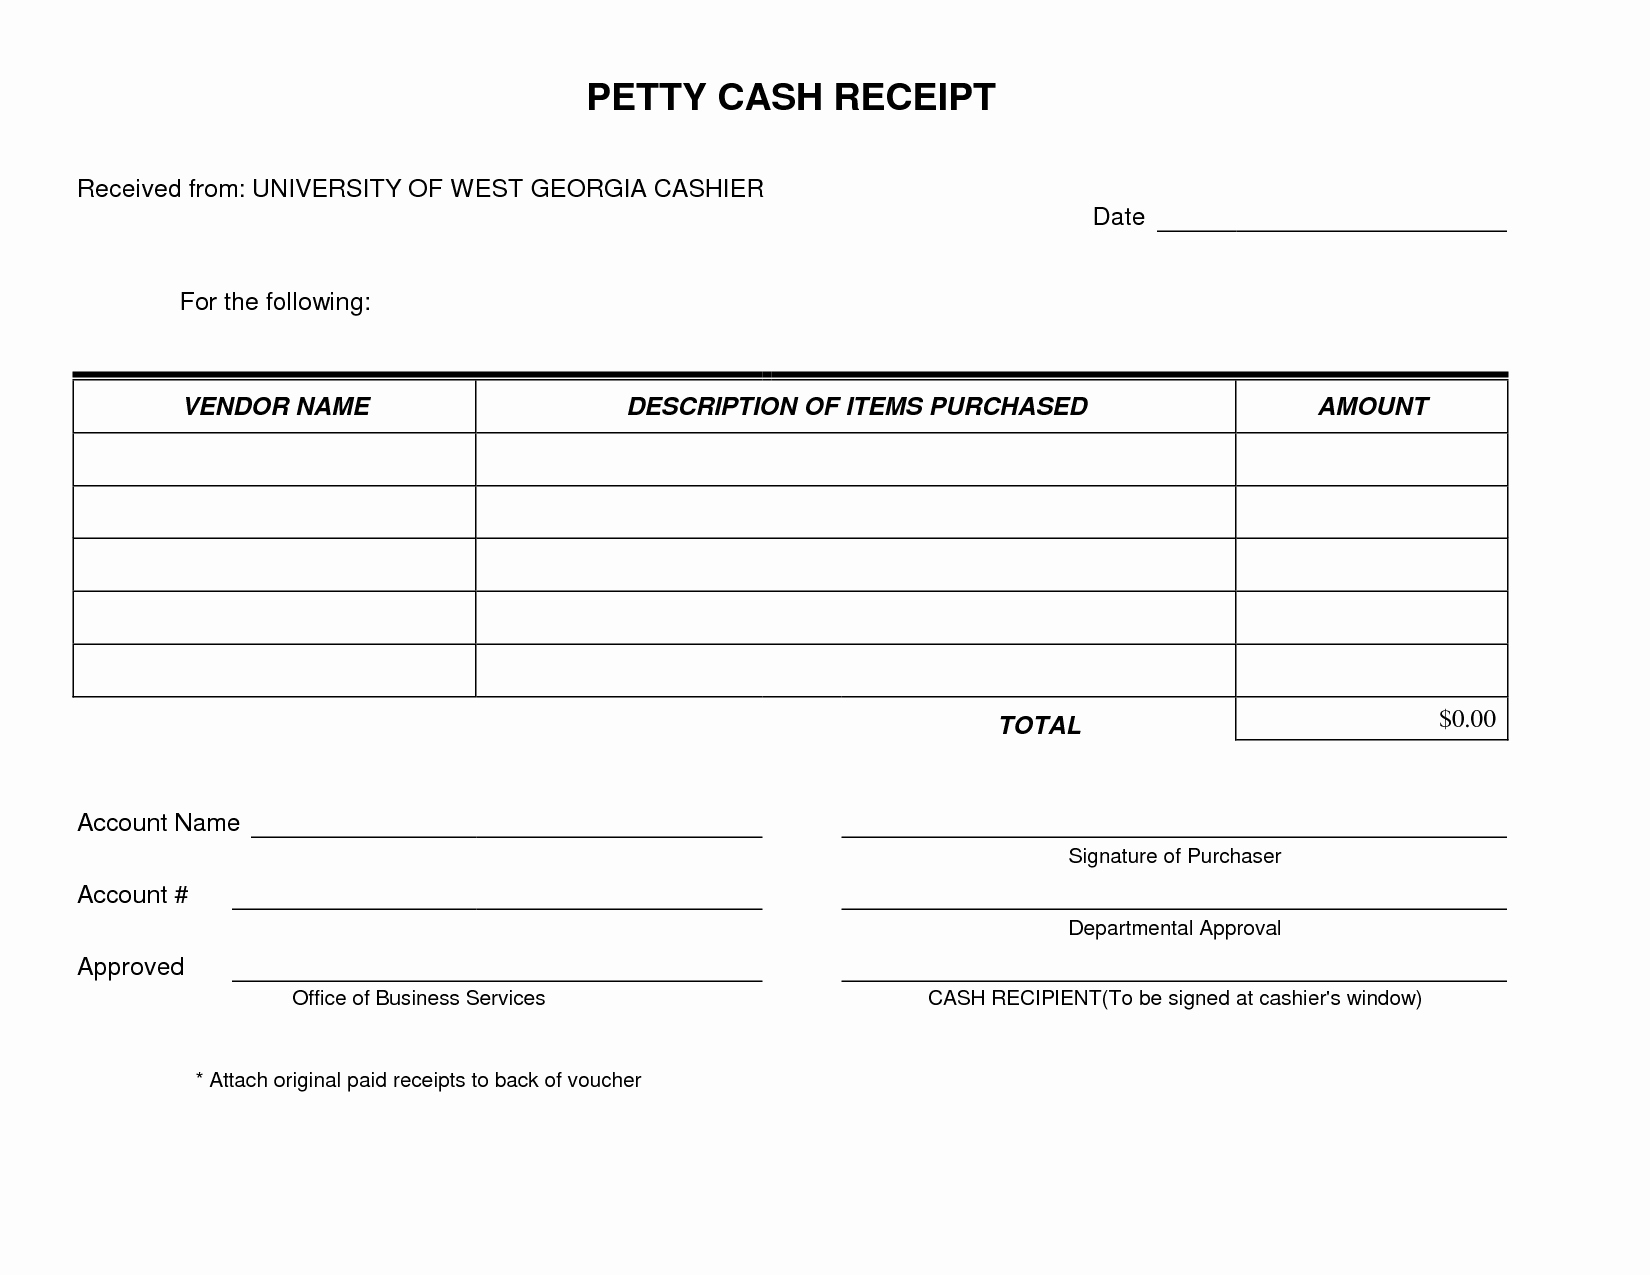 Petty Cash Receipt form Template Very Simple and Easy to